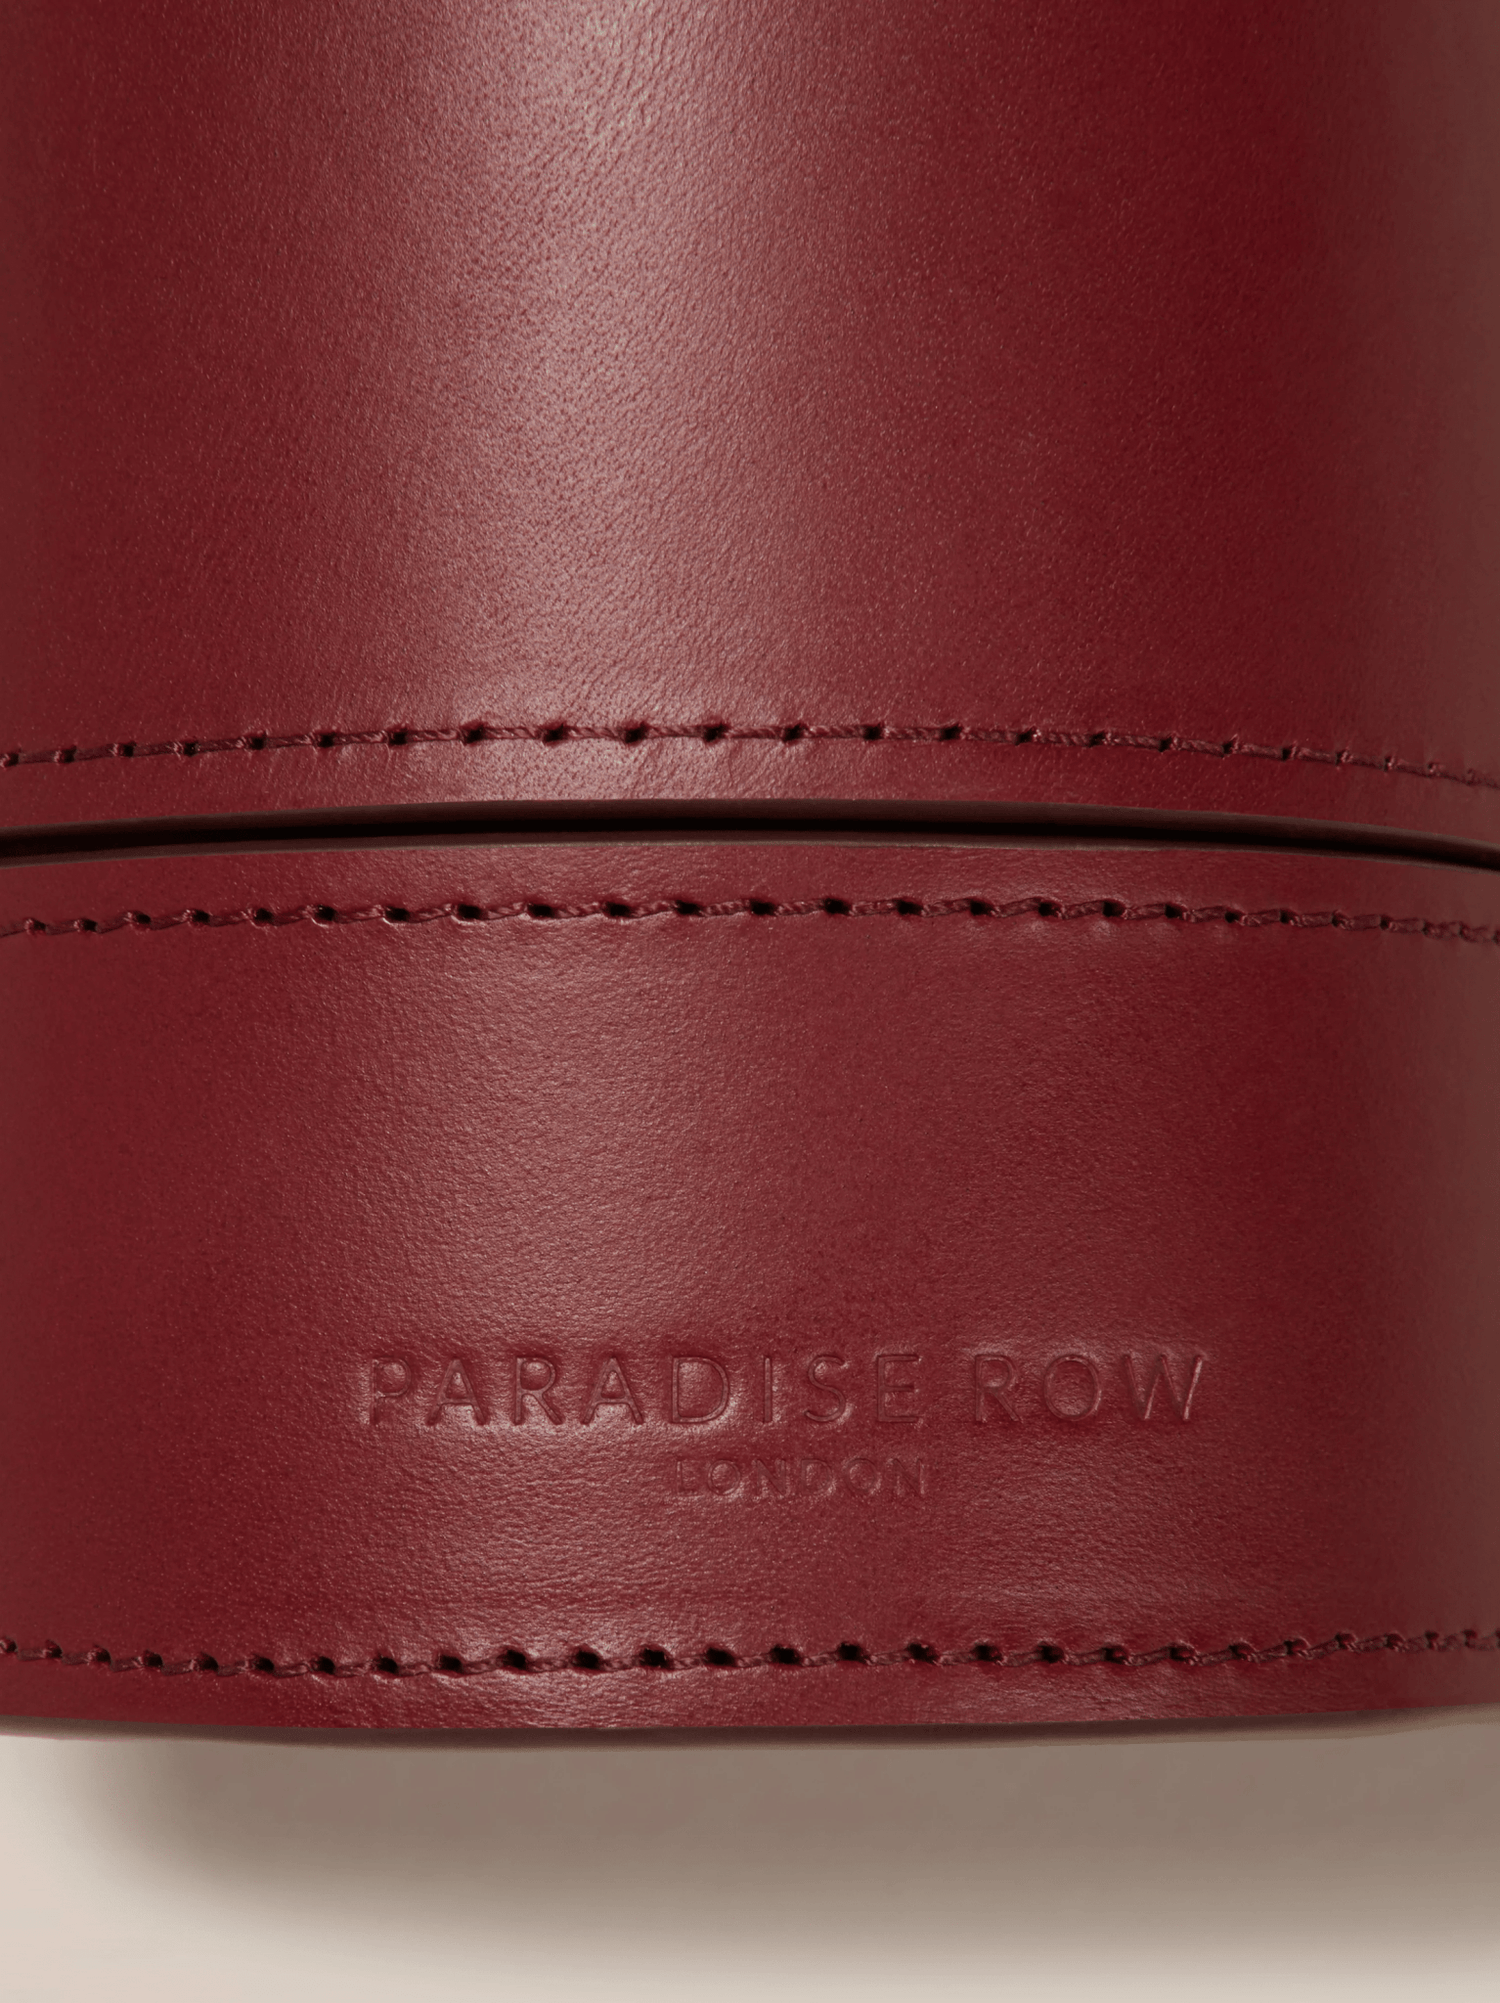 Leather Tennis Ball Holder in Red